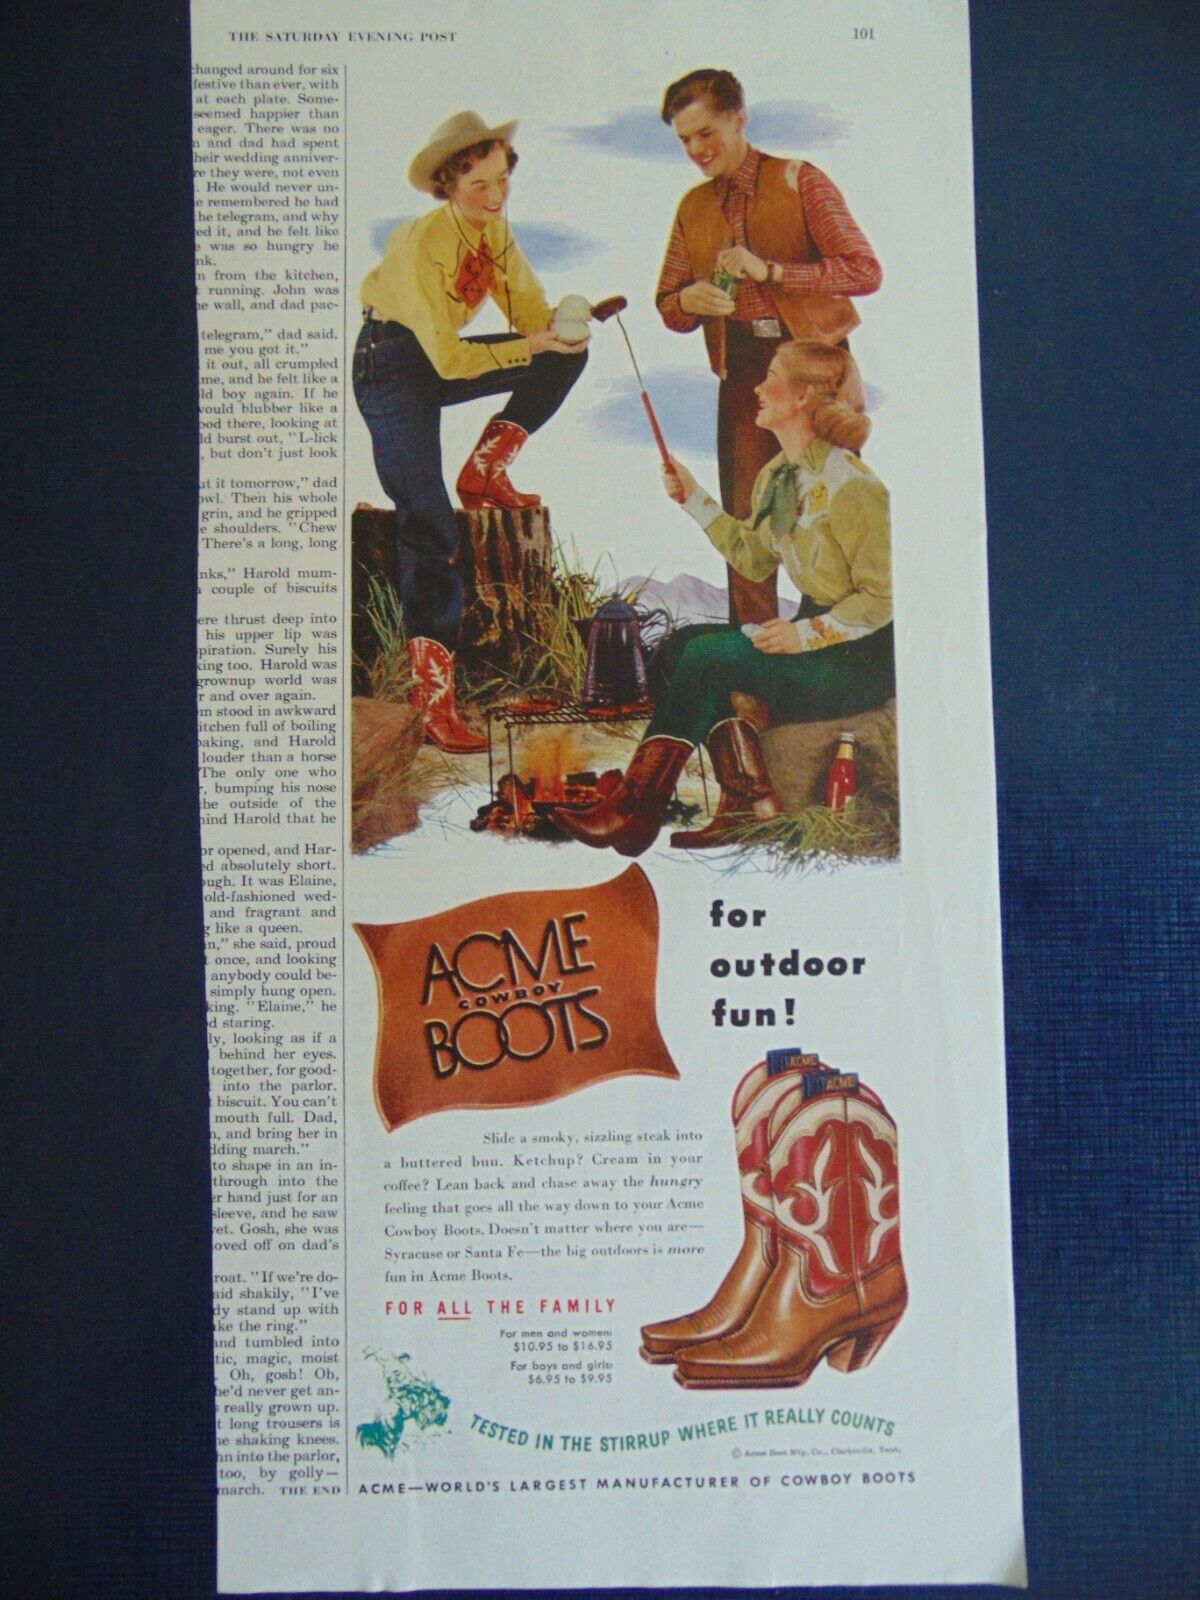 1948 ACME COWBOY BOOTS Tested In The Stirrup Where it Counts art print ad